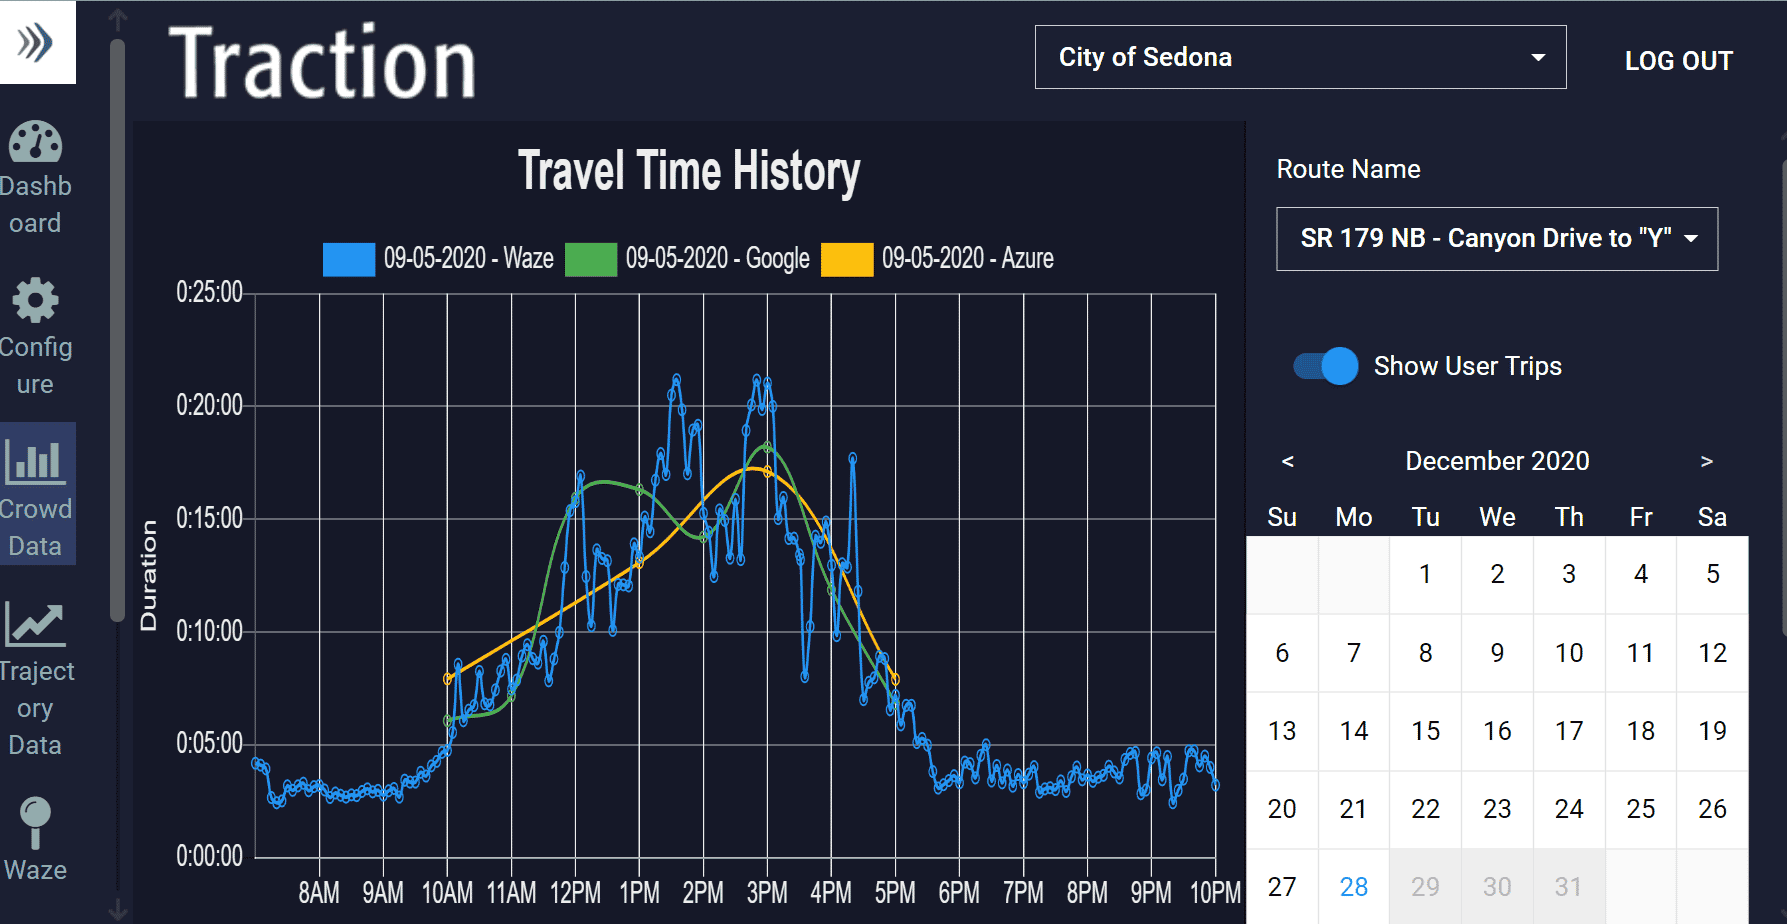 Traction travel time data